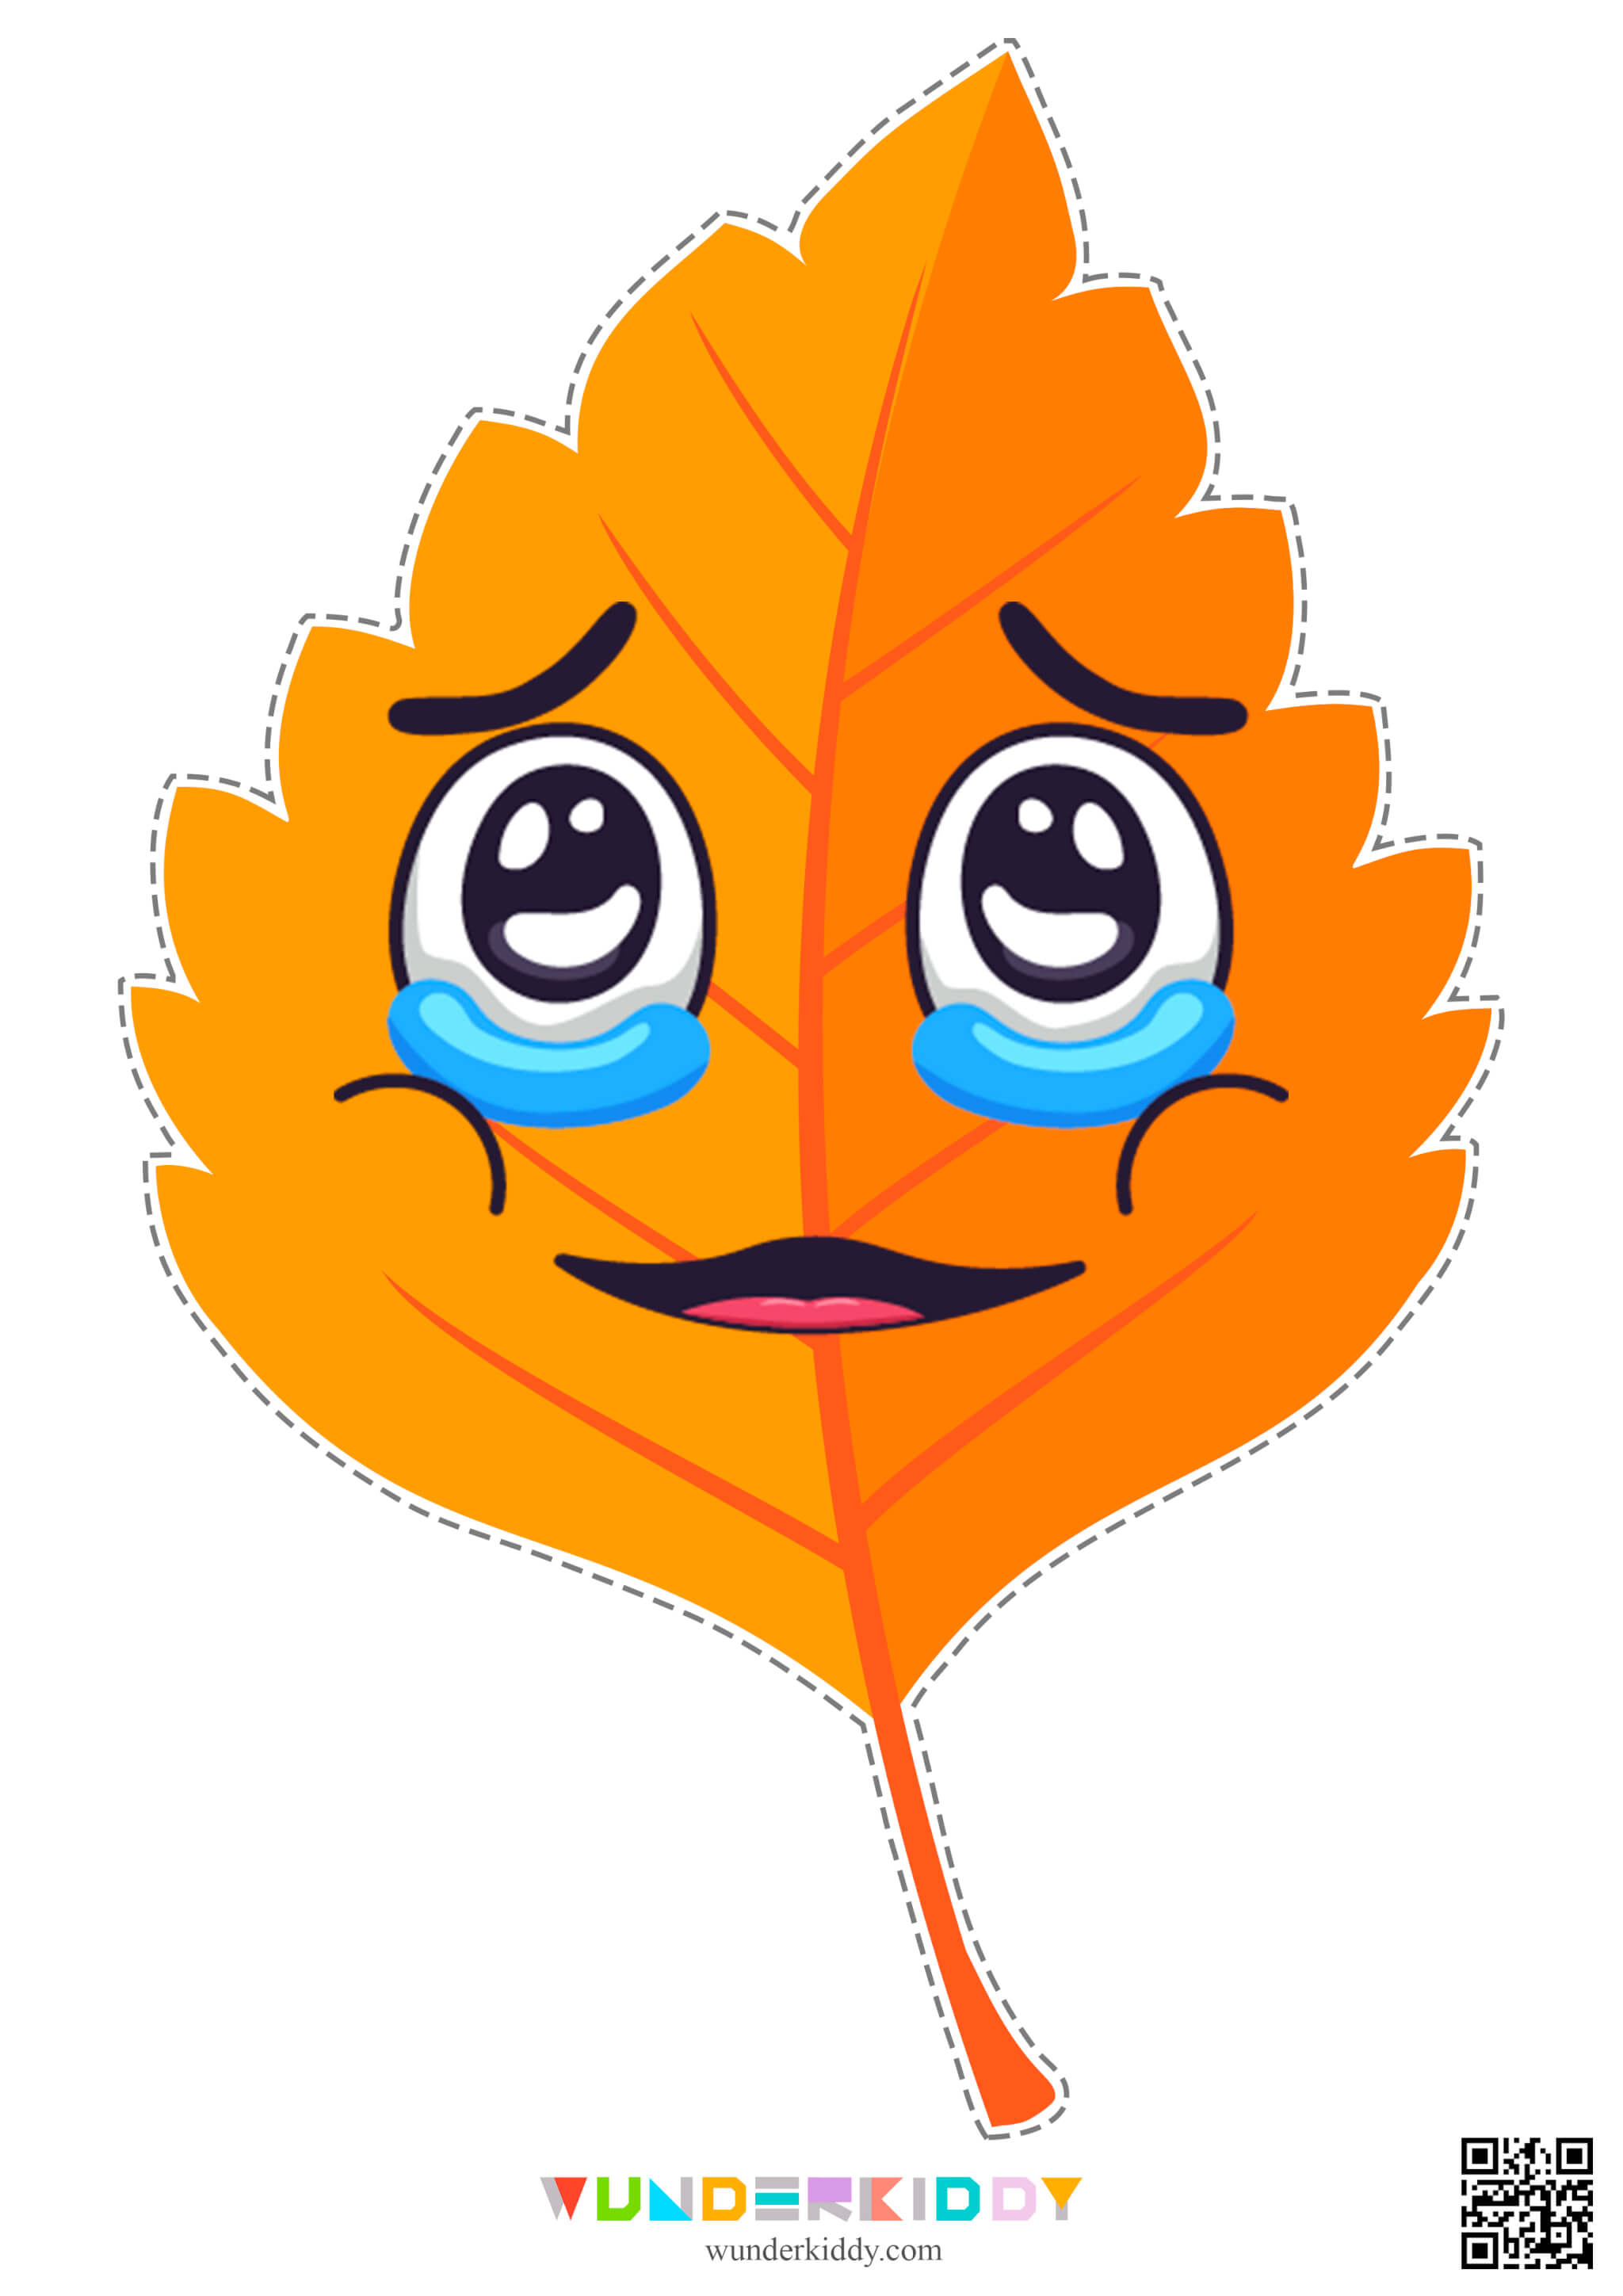 Activity sheet «Funny autumn leaves» - Image 9